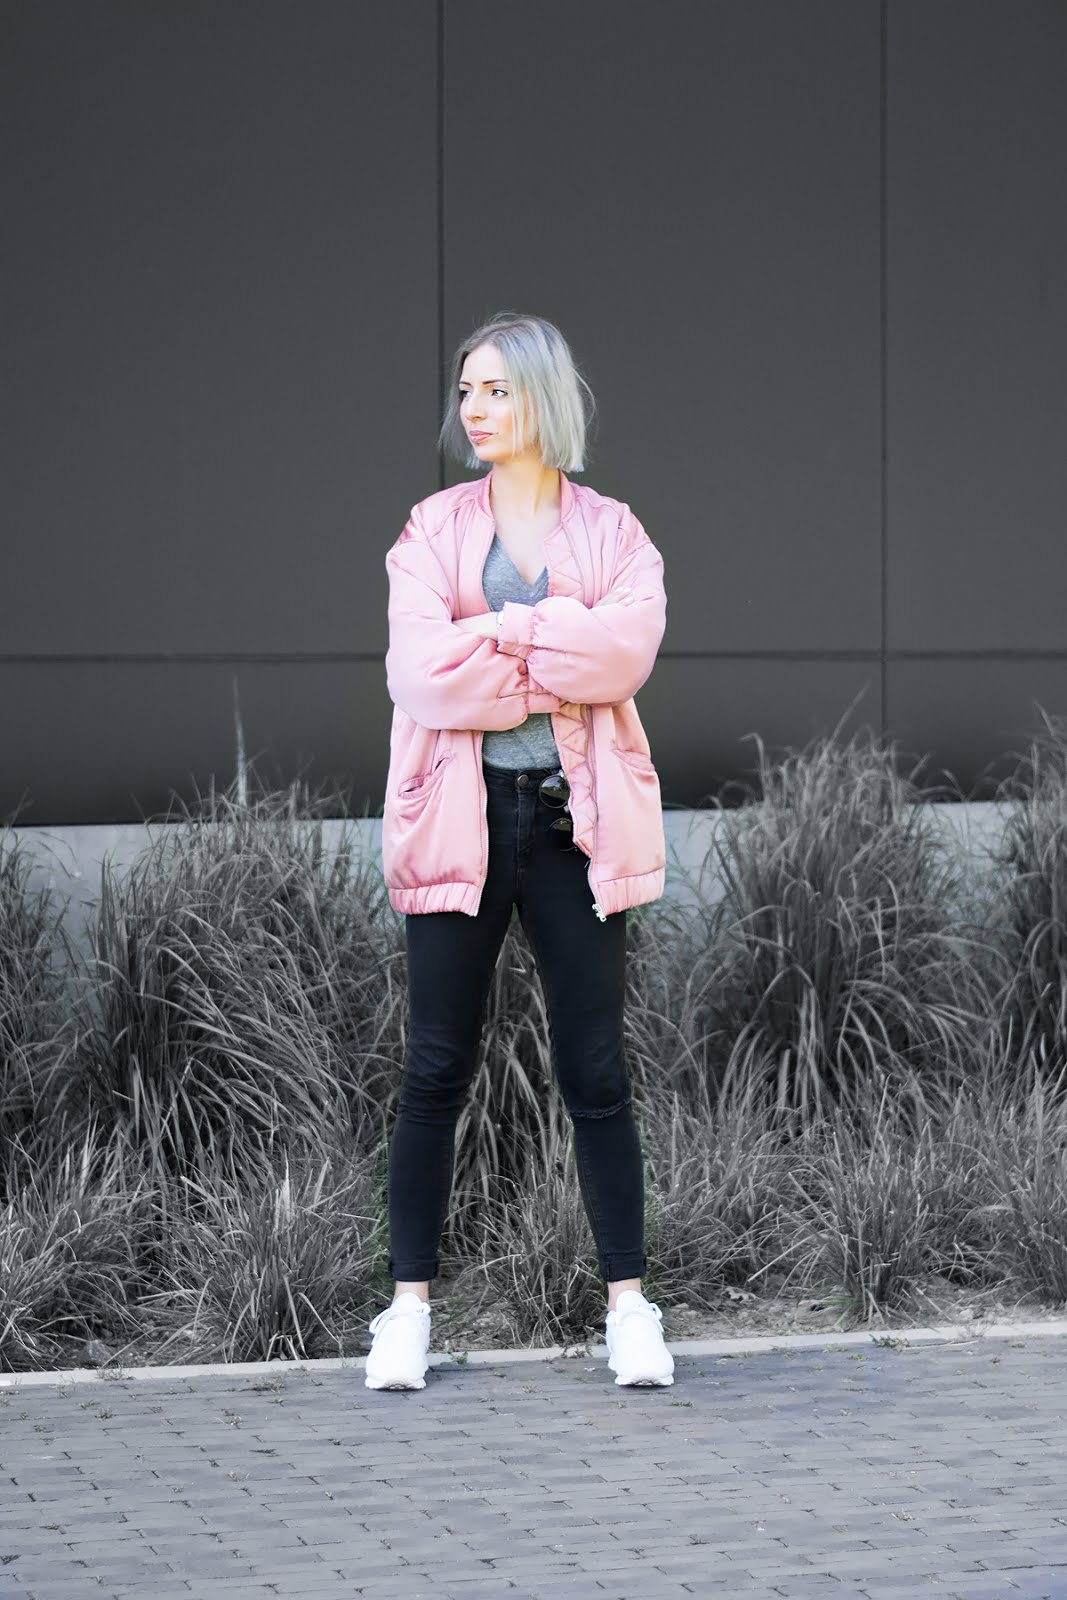 Mango pink satin oversized bomber jacket, h&m divided basic v neck tshirt in grey, asos ridley skinny jeans, reebok classic white sneakers, outfit